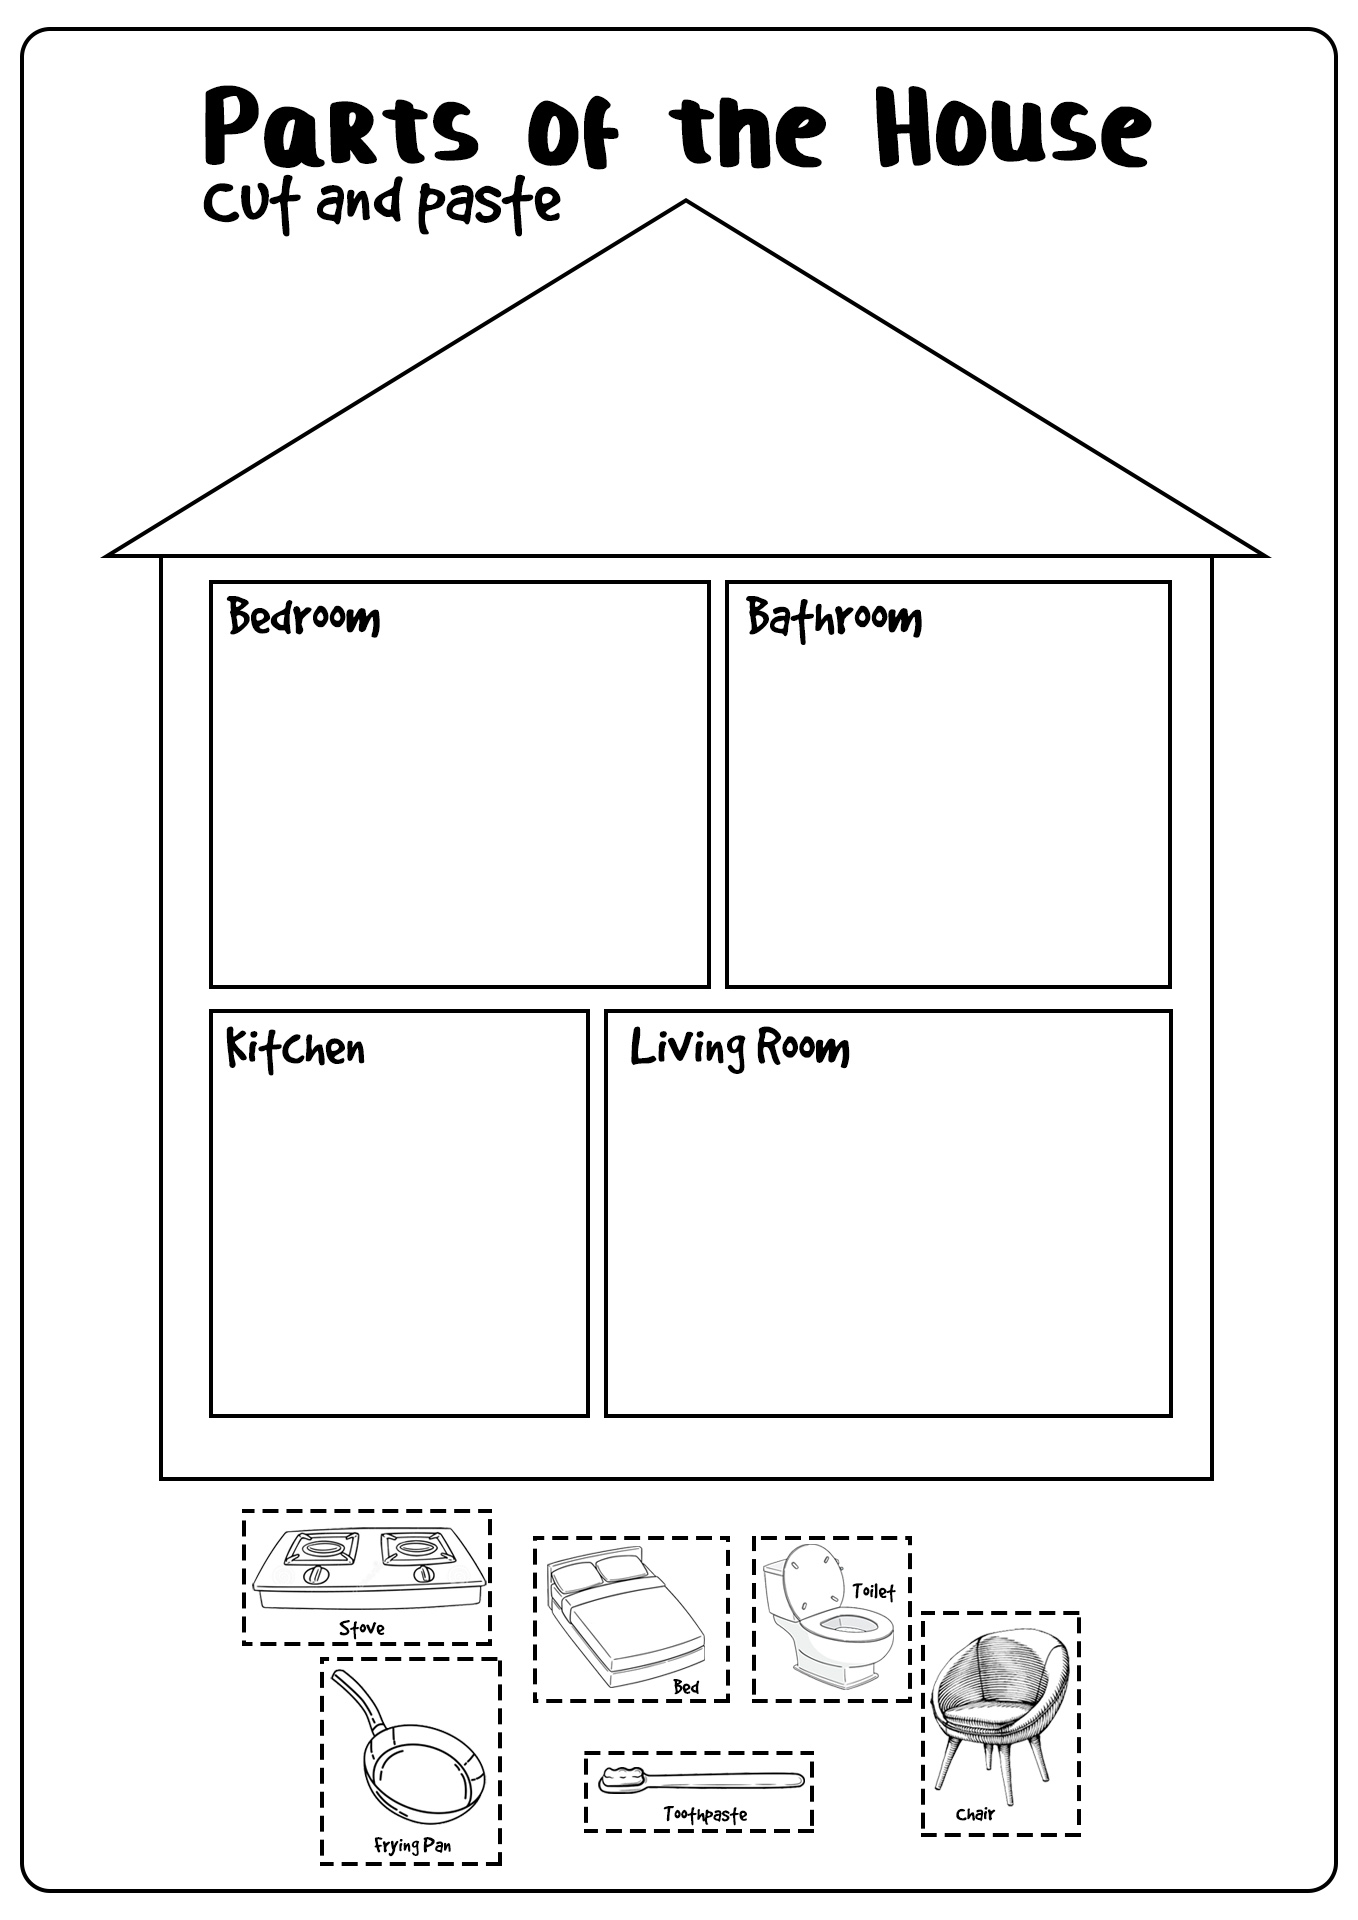 Parts of the House Worksheets for Kids